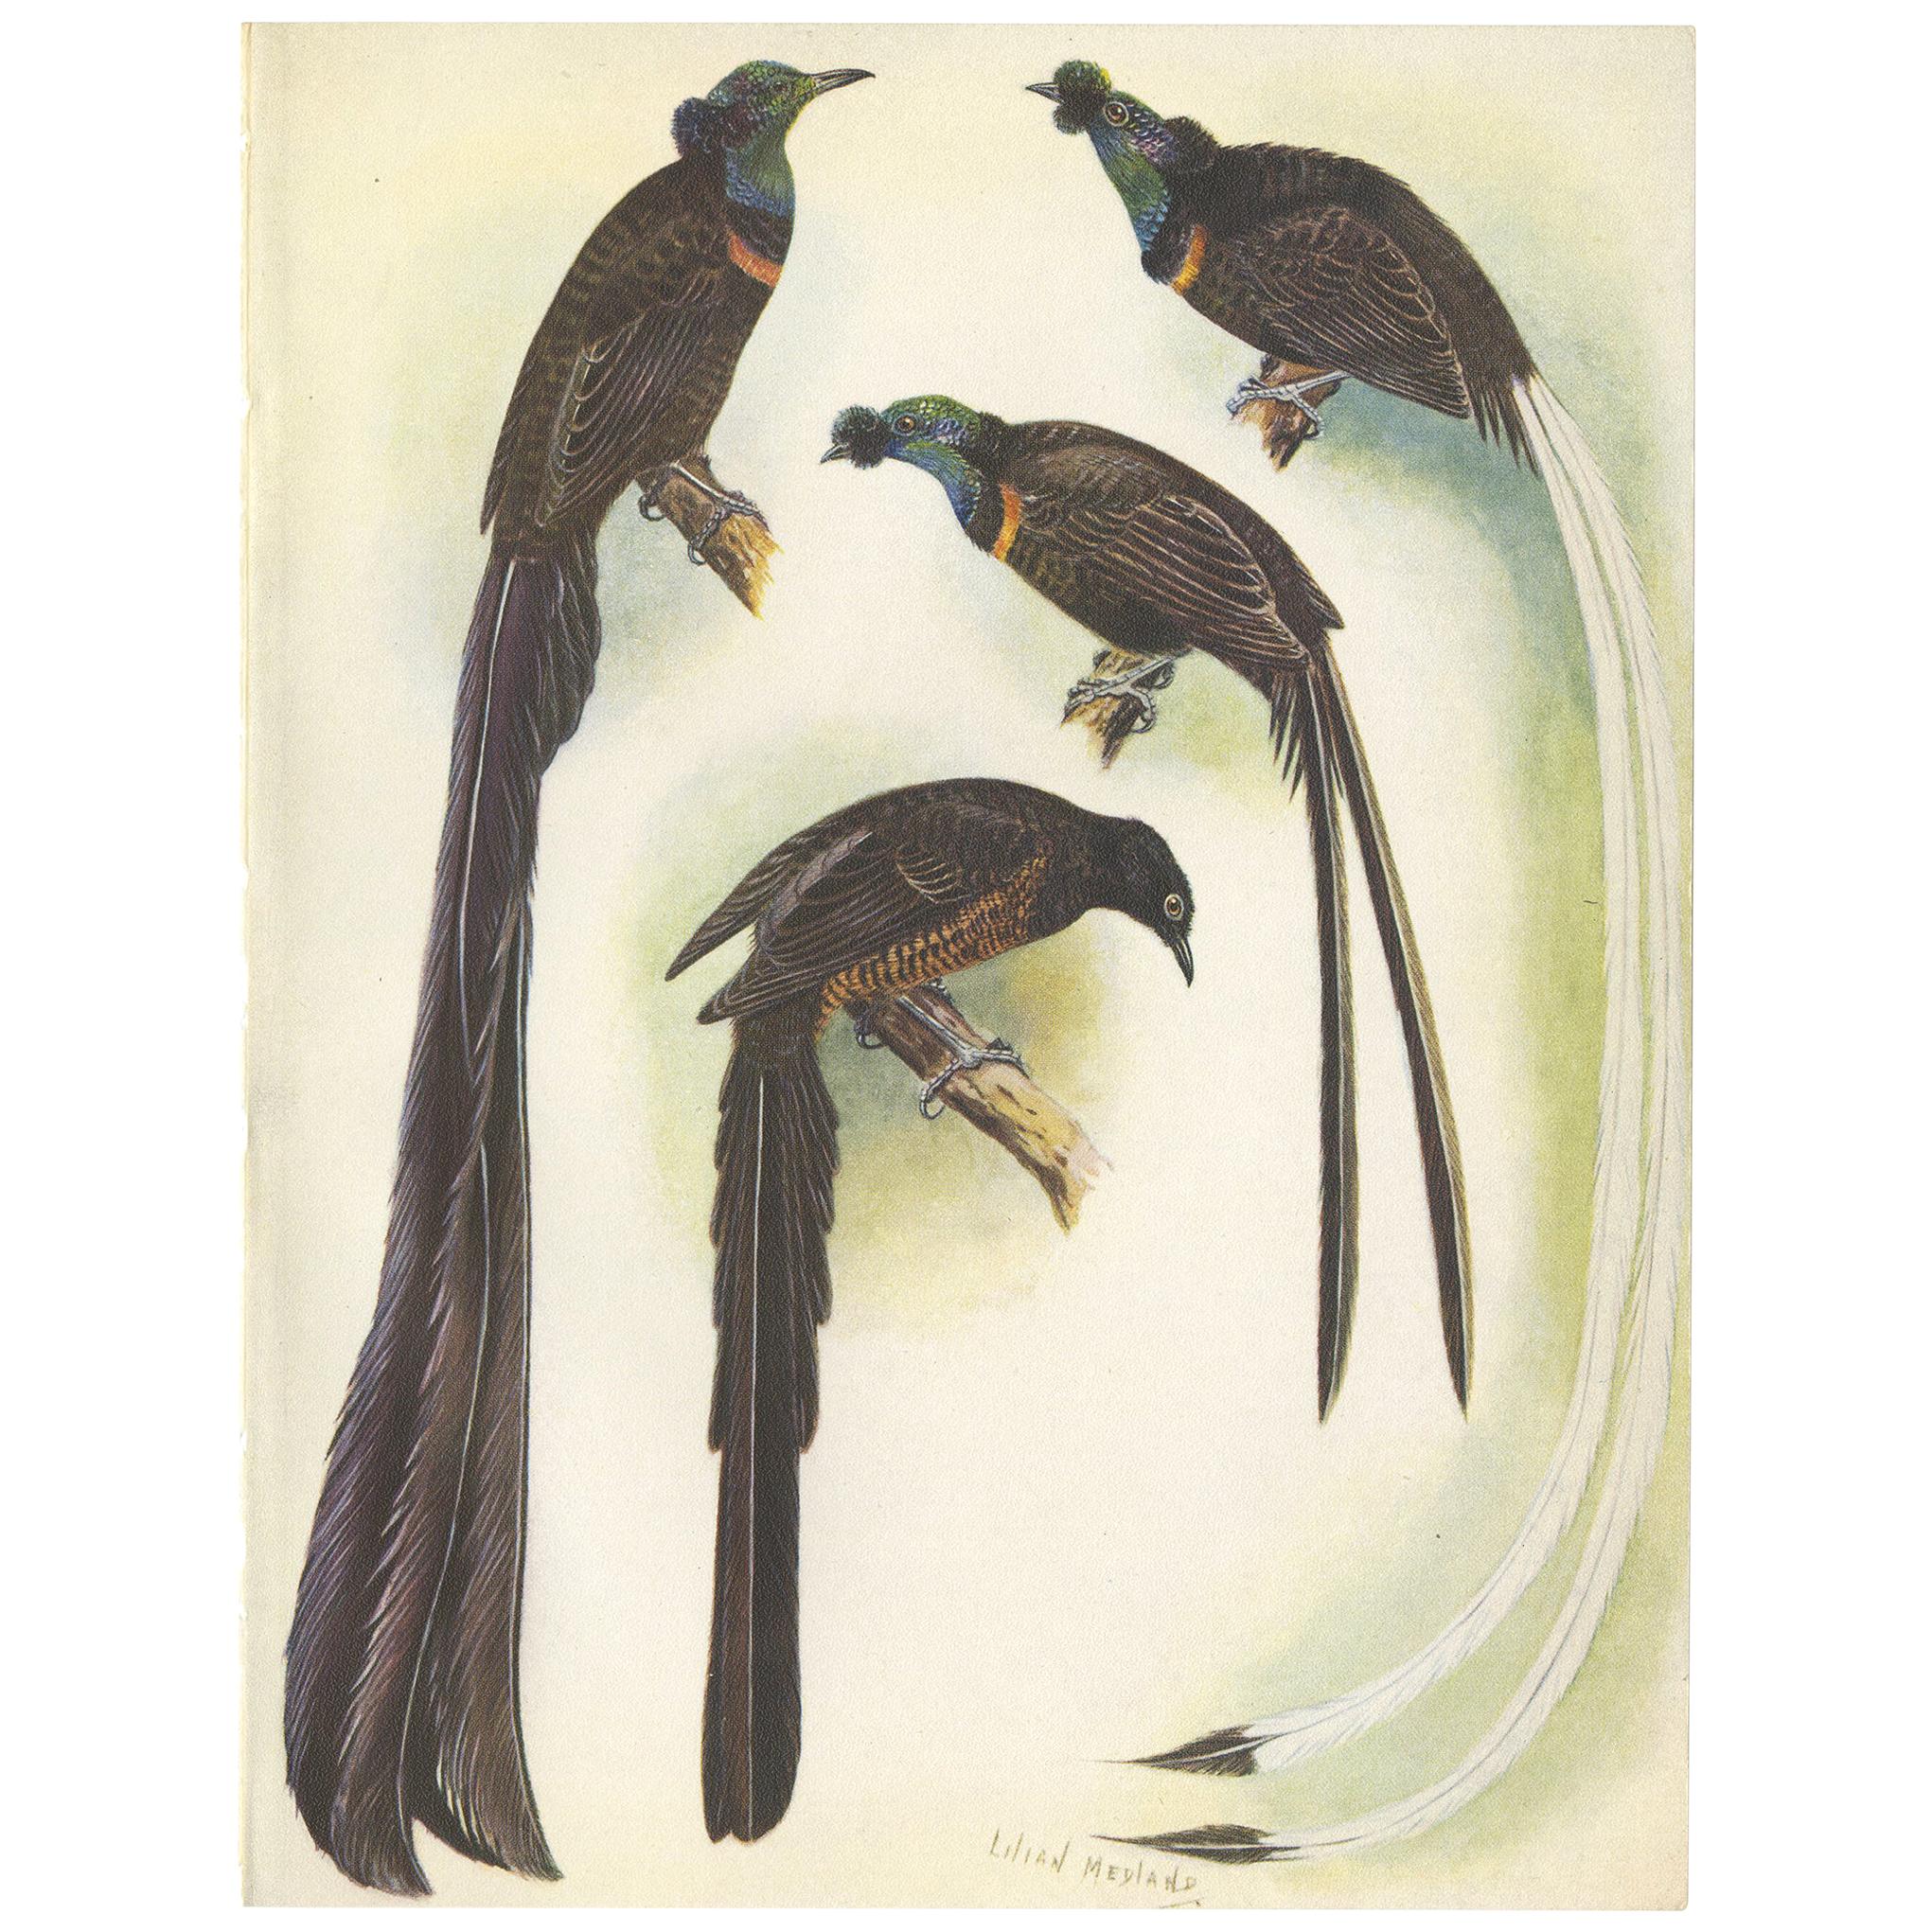 Antique Print of the Princess Stephanie's Bird Paradise and Others, 1950